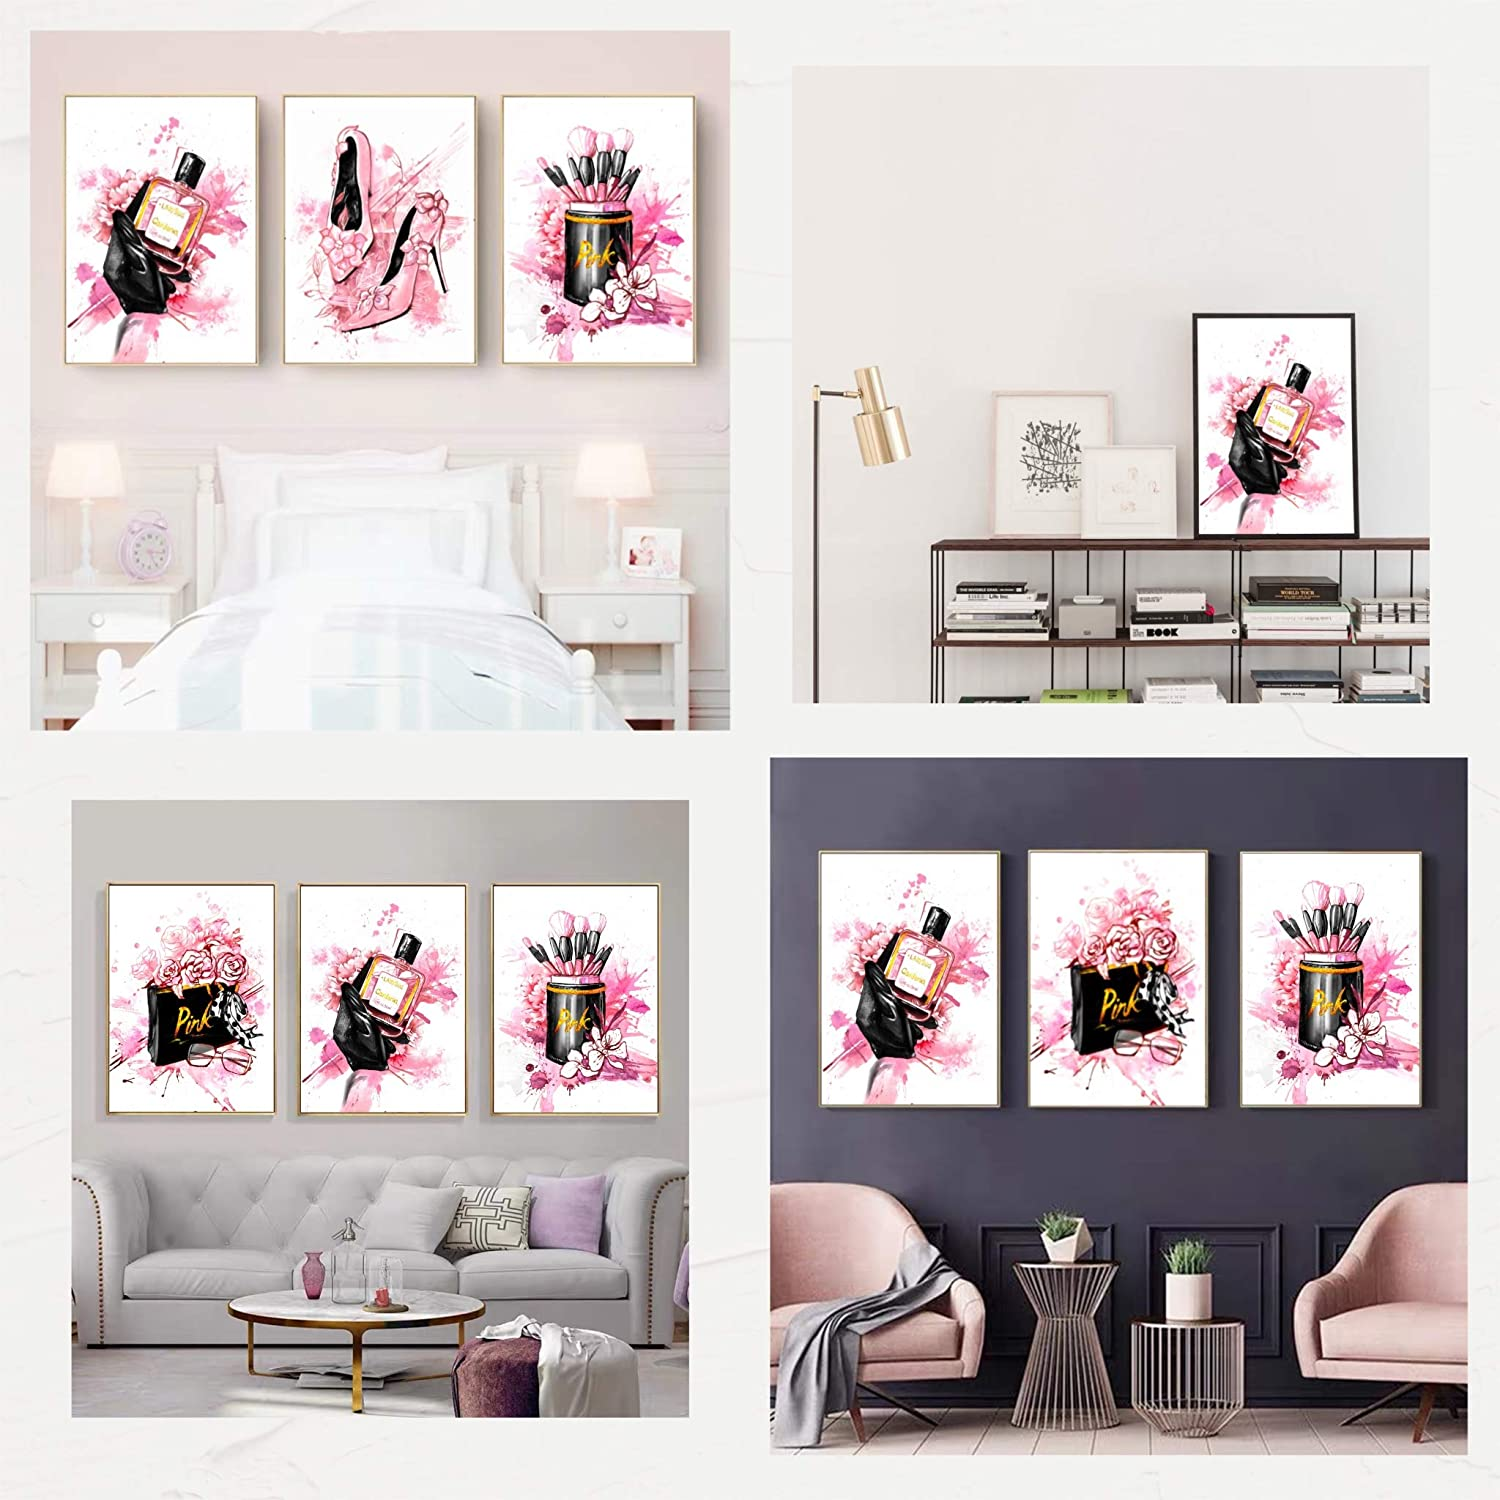  Creoate Fashion Women Pink Canvas Wall Art for Girls Bedroom 2  Pieces Modern Pink Perfume Lady Lips Poster Canvas Print Artwork Framed Set  for Women Room Decor,Wrapped Canvas,12x15 Inch x2pcs: Posters